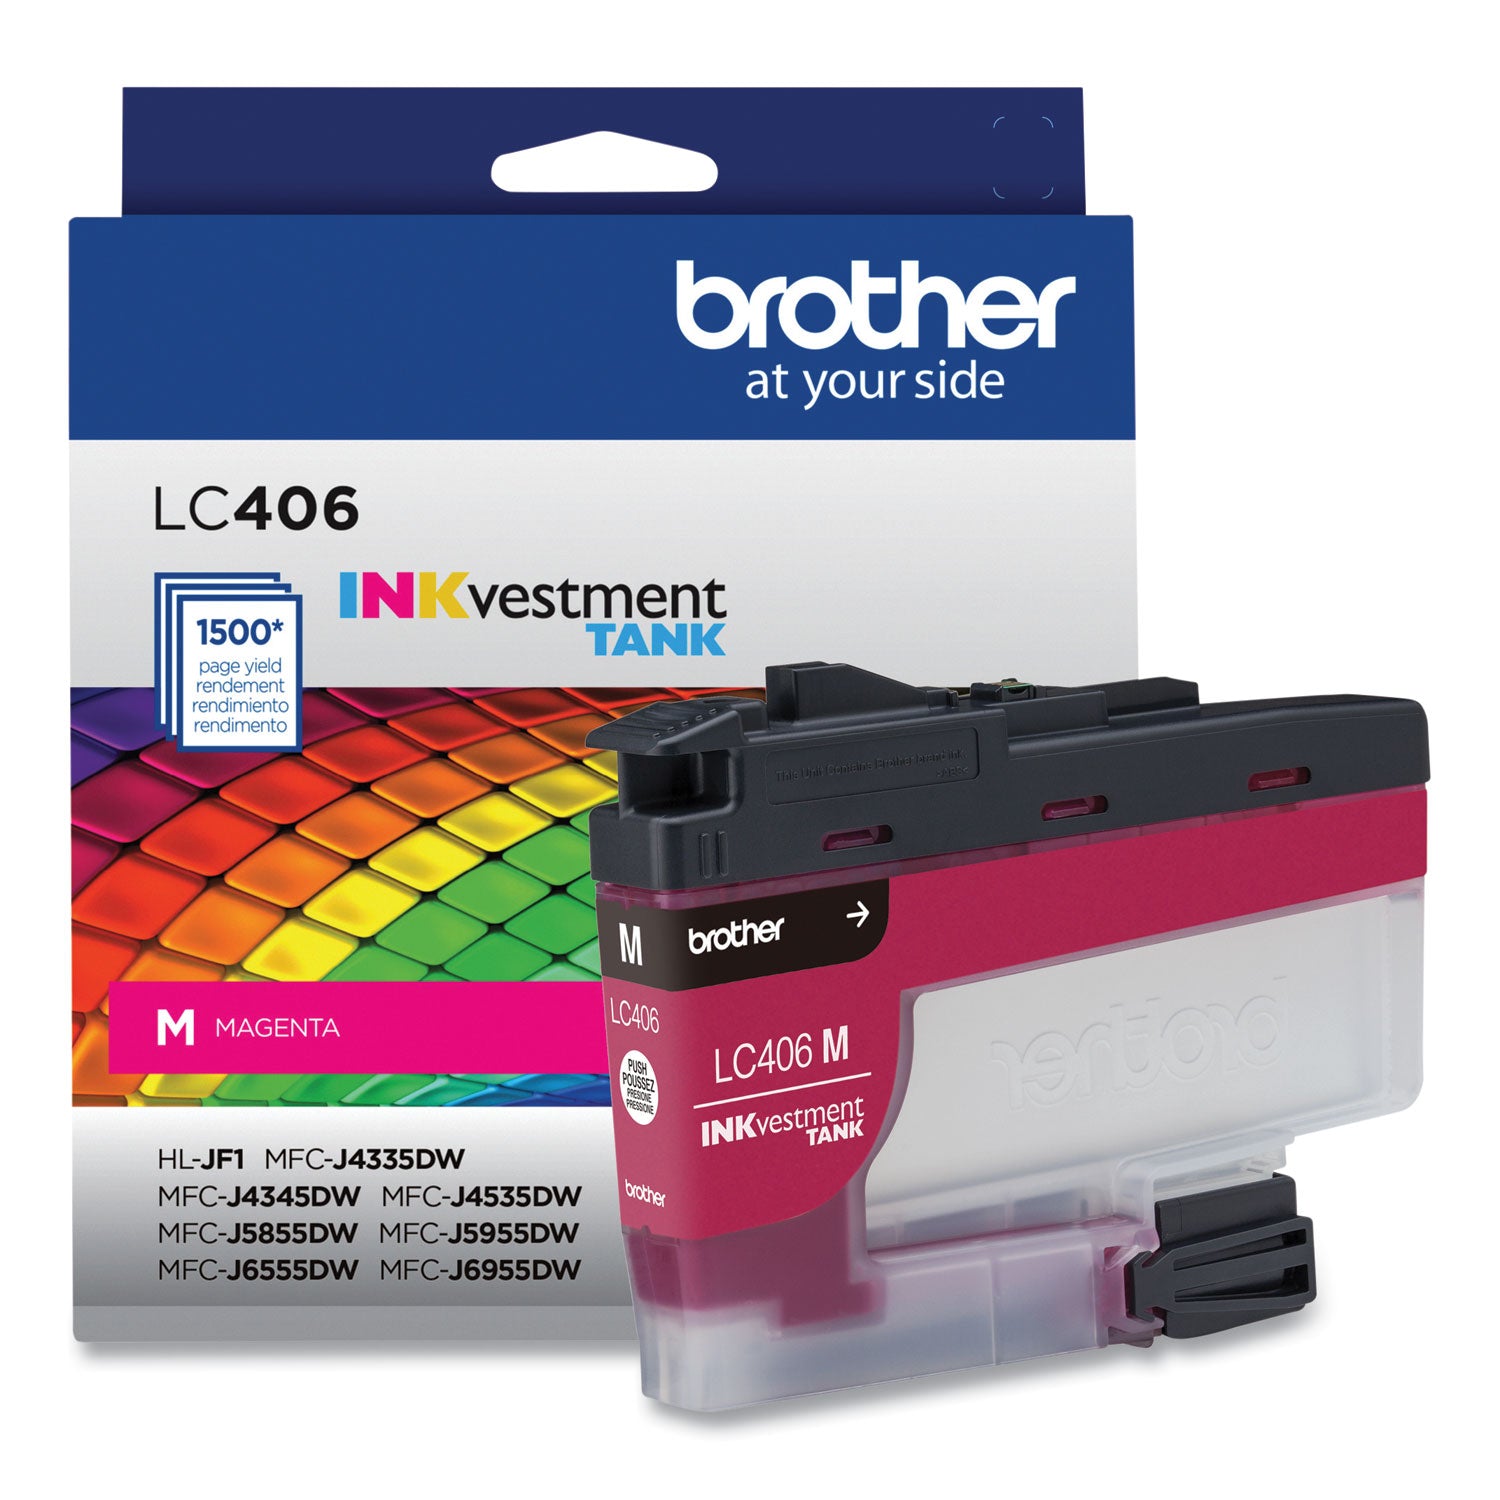 lc406ms-inkvestment-ink-1500-page-yield-magenta_brtlc406ms - 4